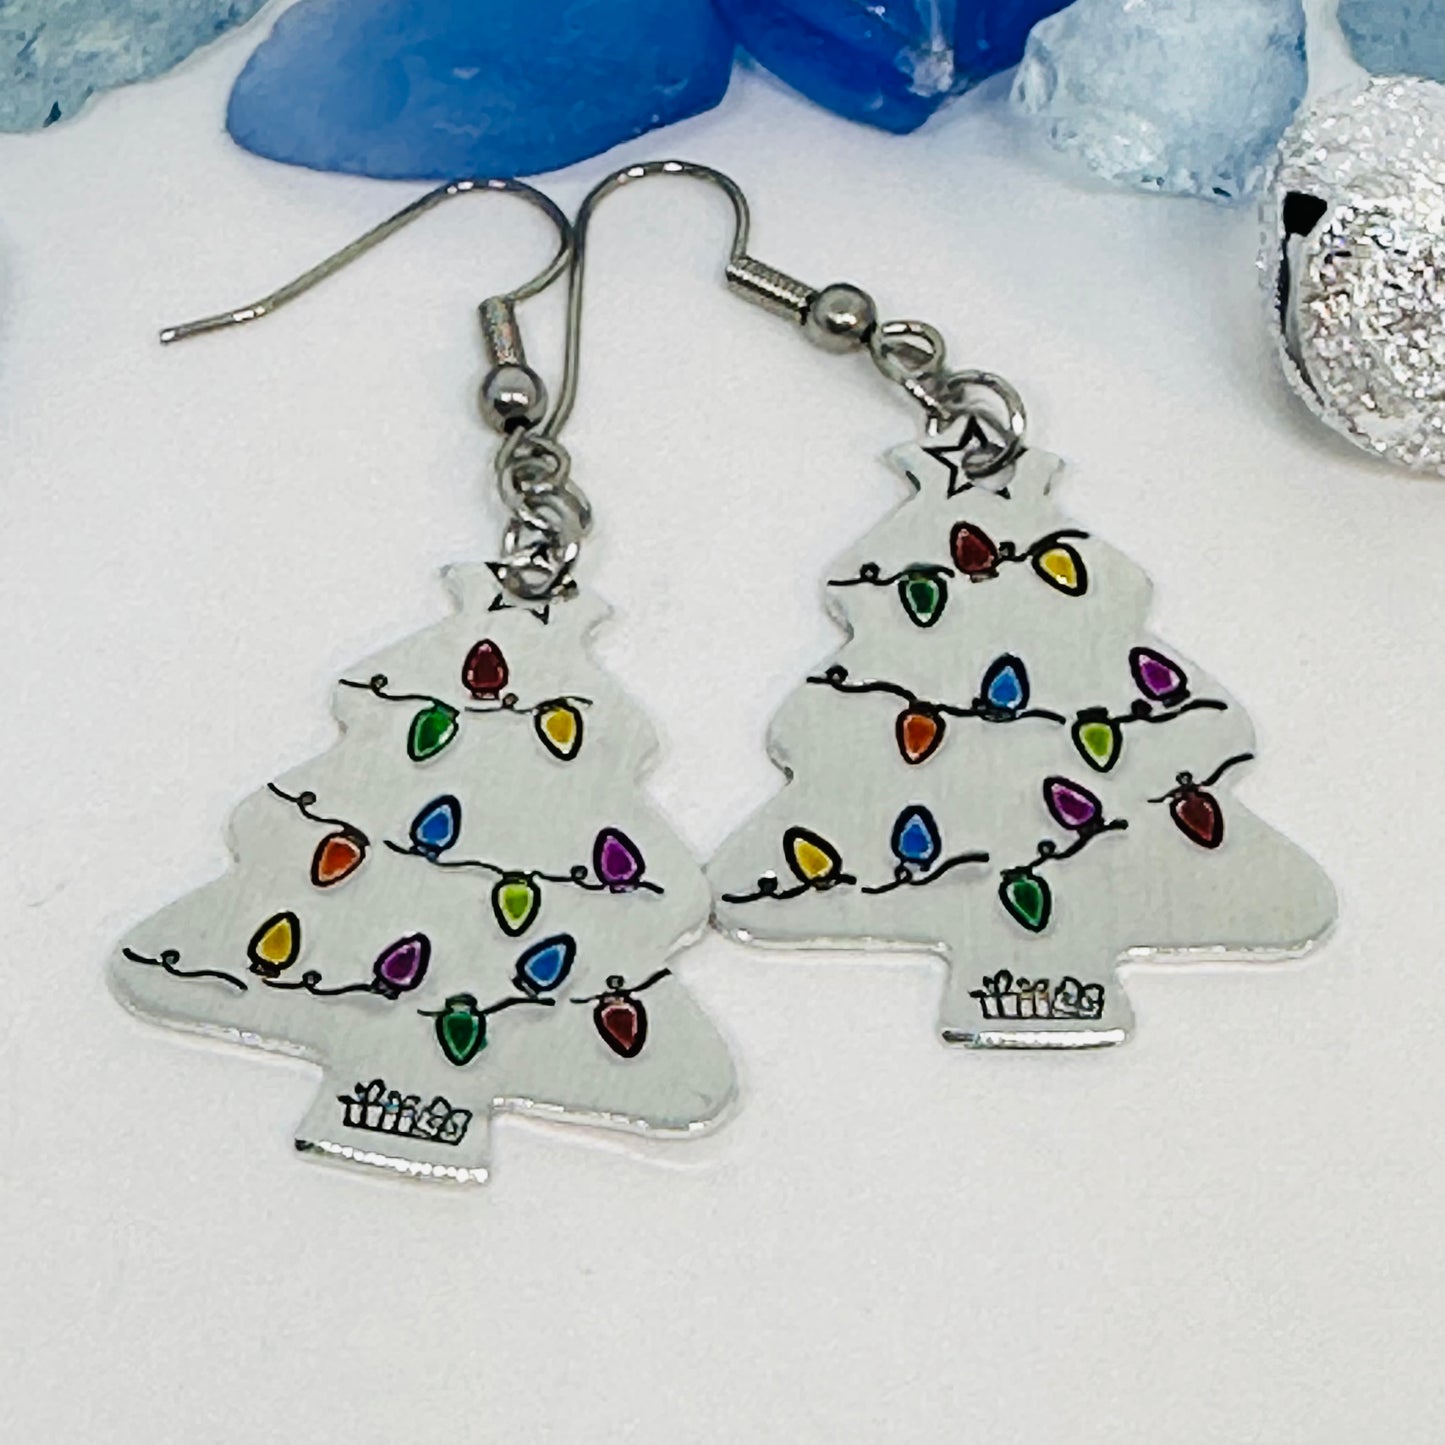 Hand Stamped Christmas Tree Earrings | Painted Christmas Tree Light Bulbs | Gifts for Her | Fun Holiday Earrings | Holiday Jewelry | Funky